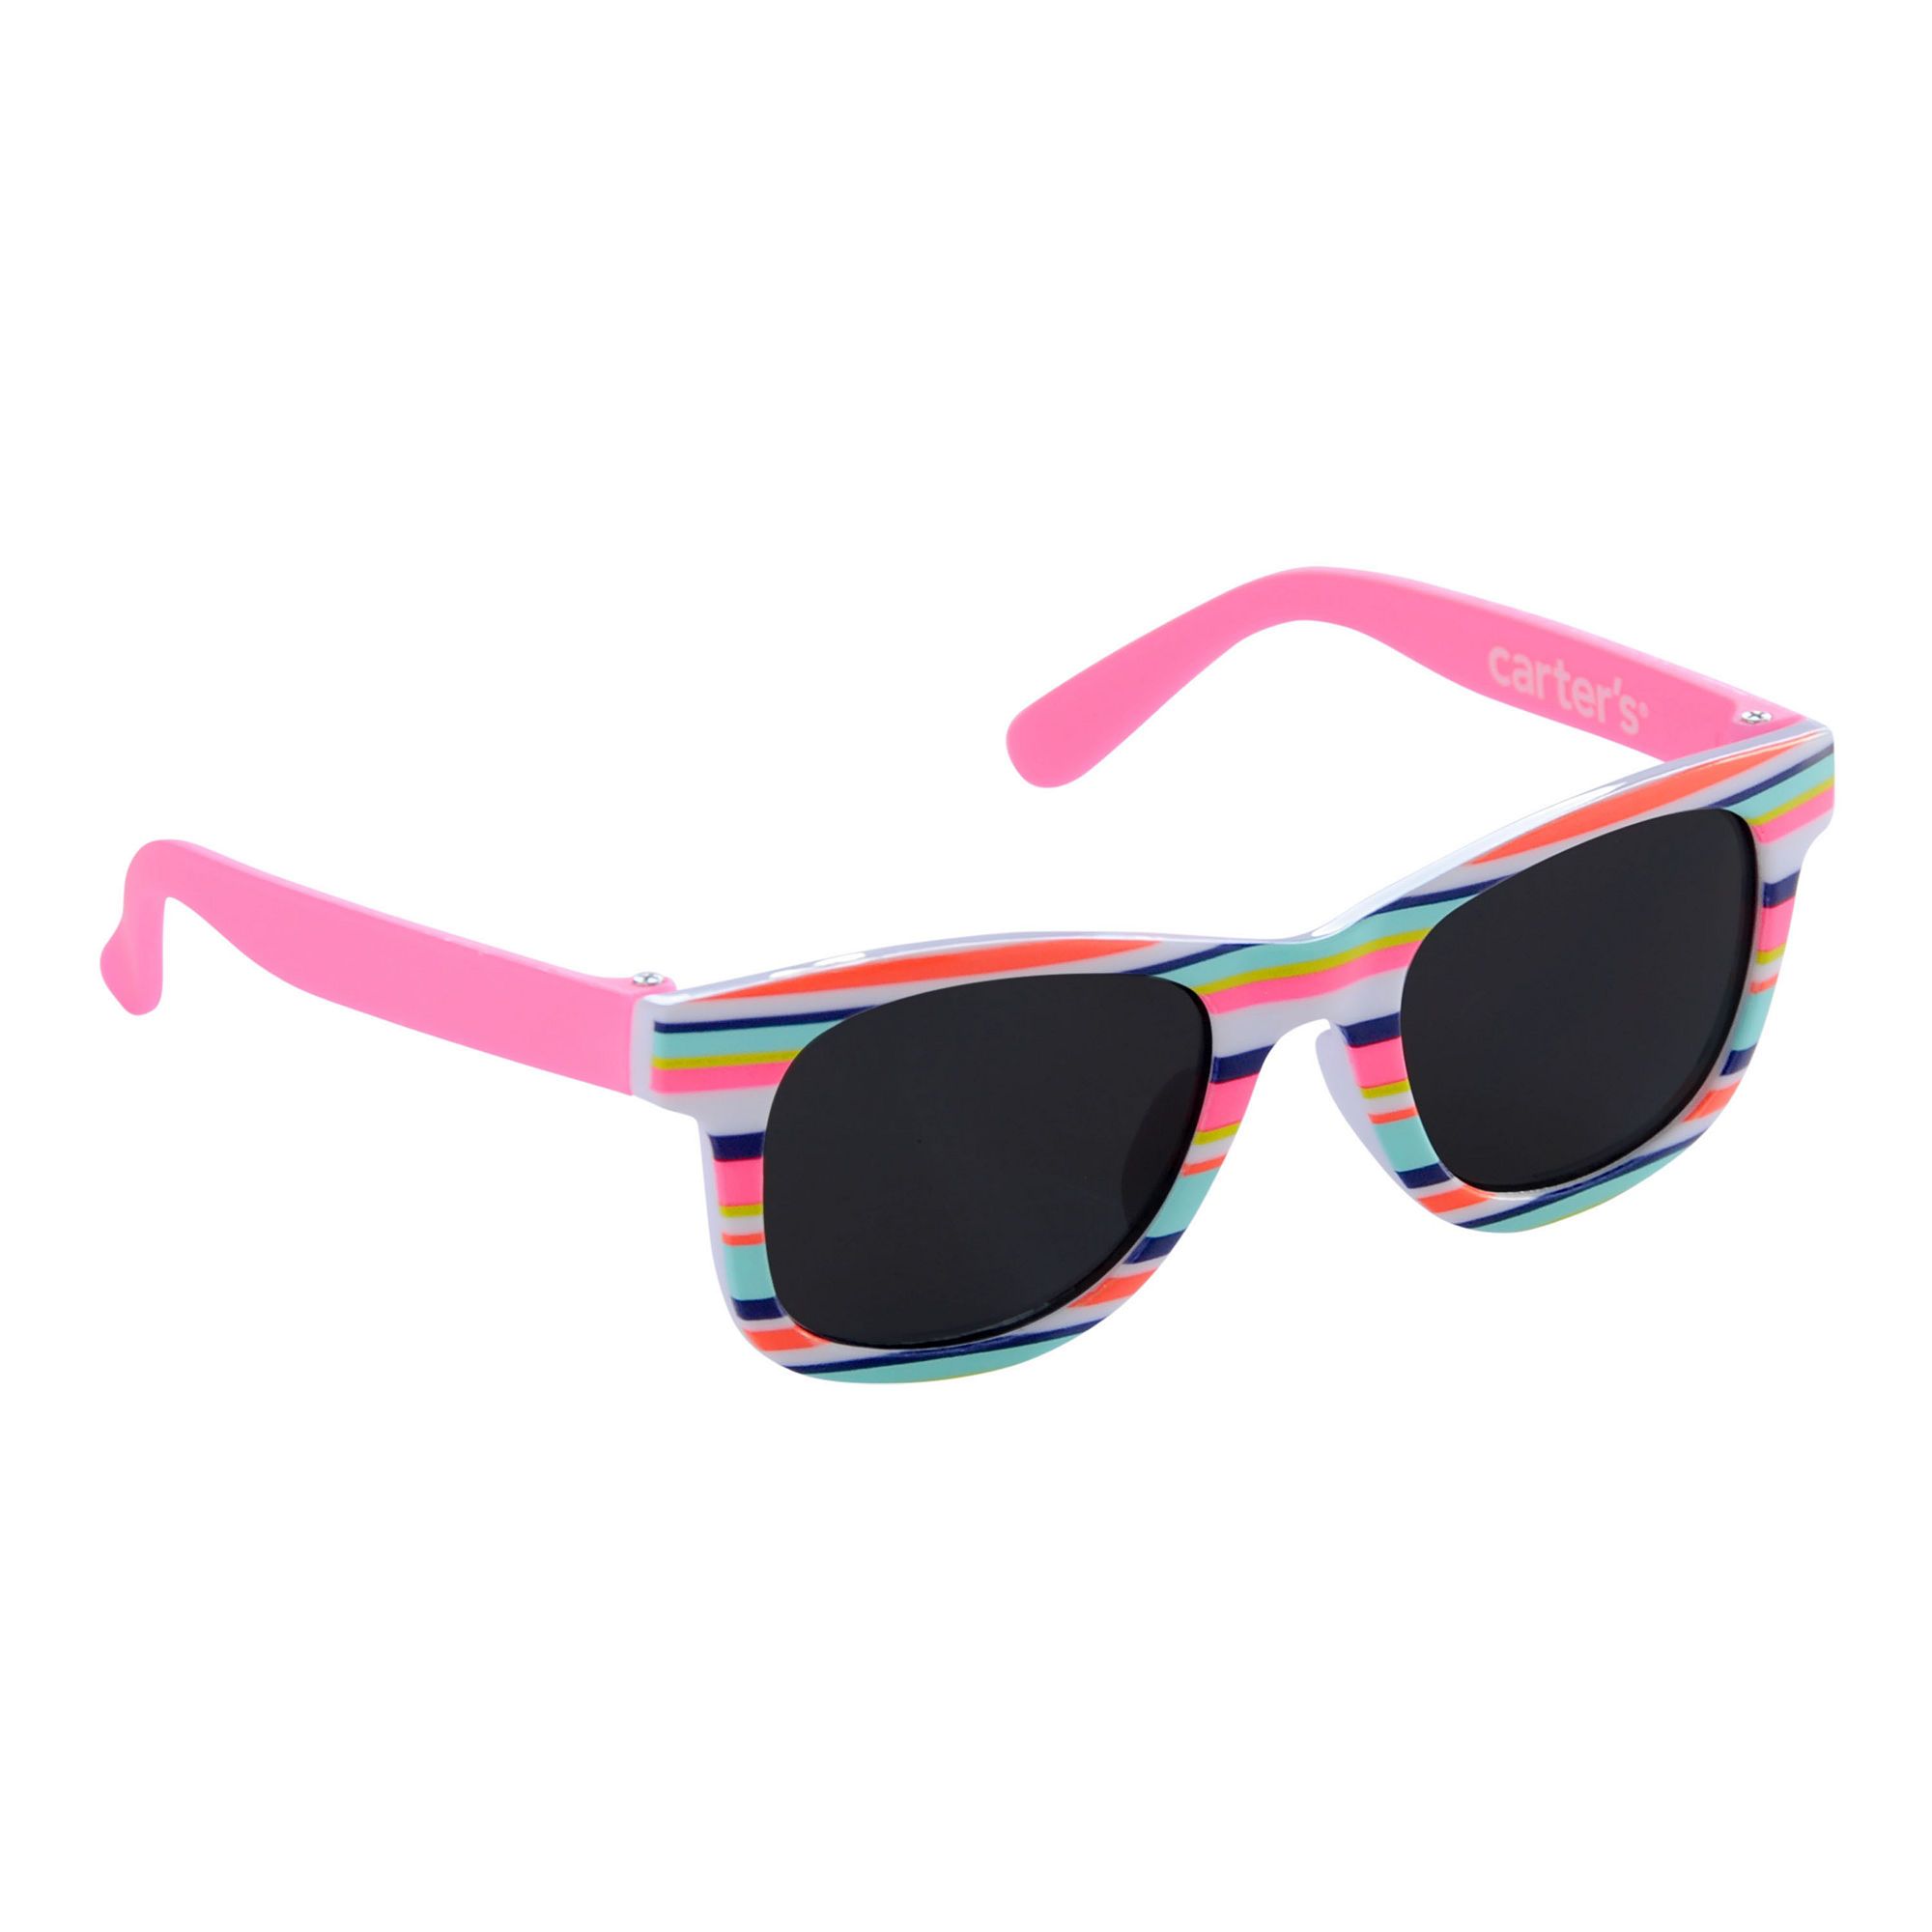 Carter's Round Sunglasses | JCPenney